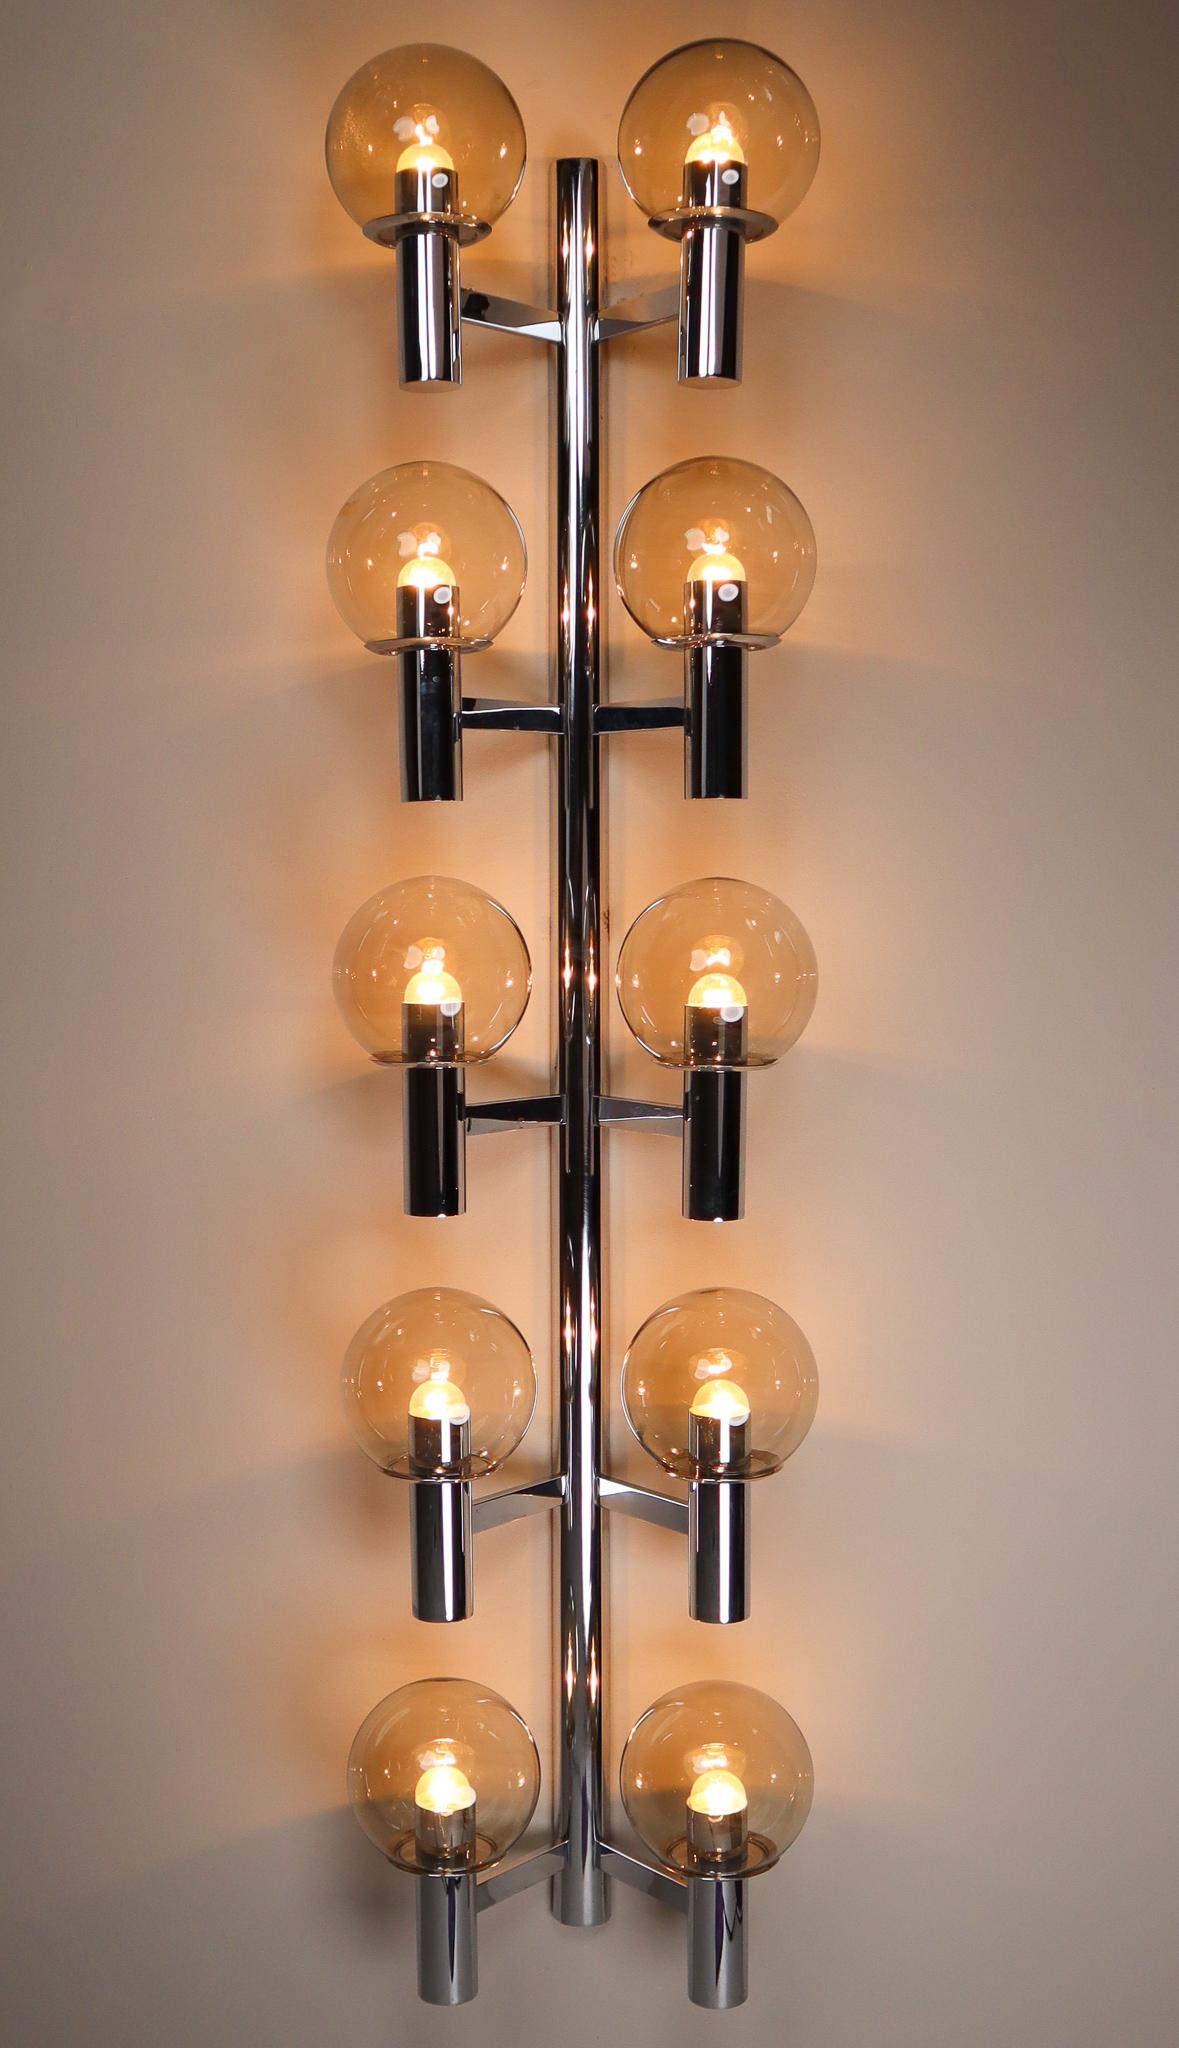 Set of 10 large Mid-Century Modern chrome wall lights- sculptures produced in Italy 1970s. The pleasant light it spreads is very atmospheric, these wall scones or fixtures will contribute to a luxurious character of the (hotel-bar) interior. Perfect